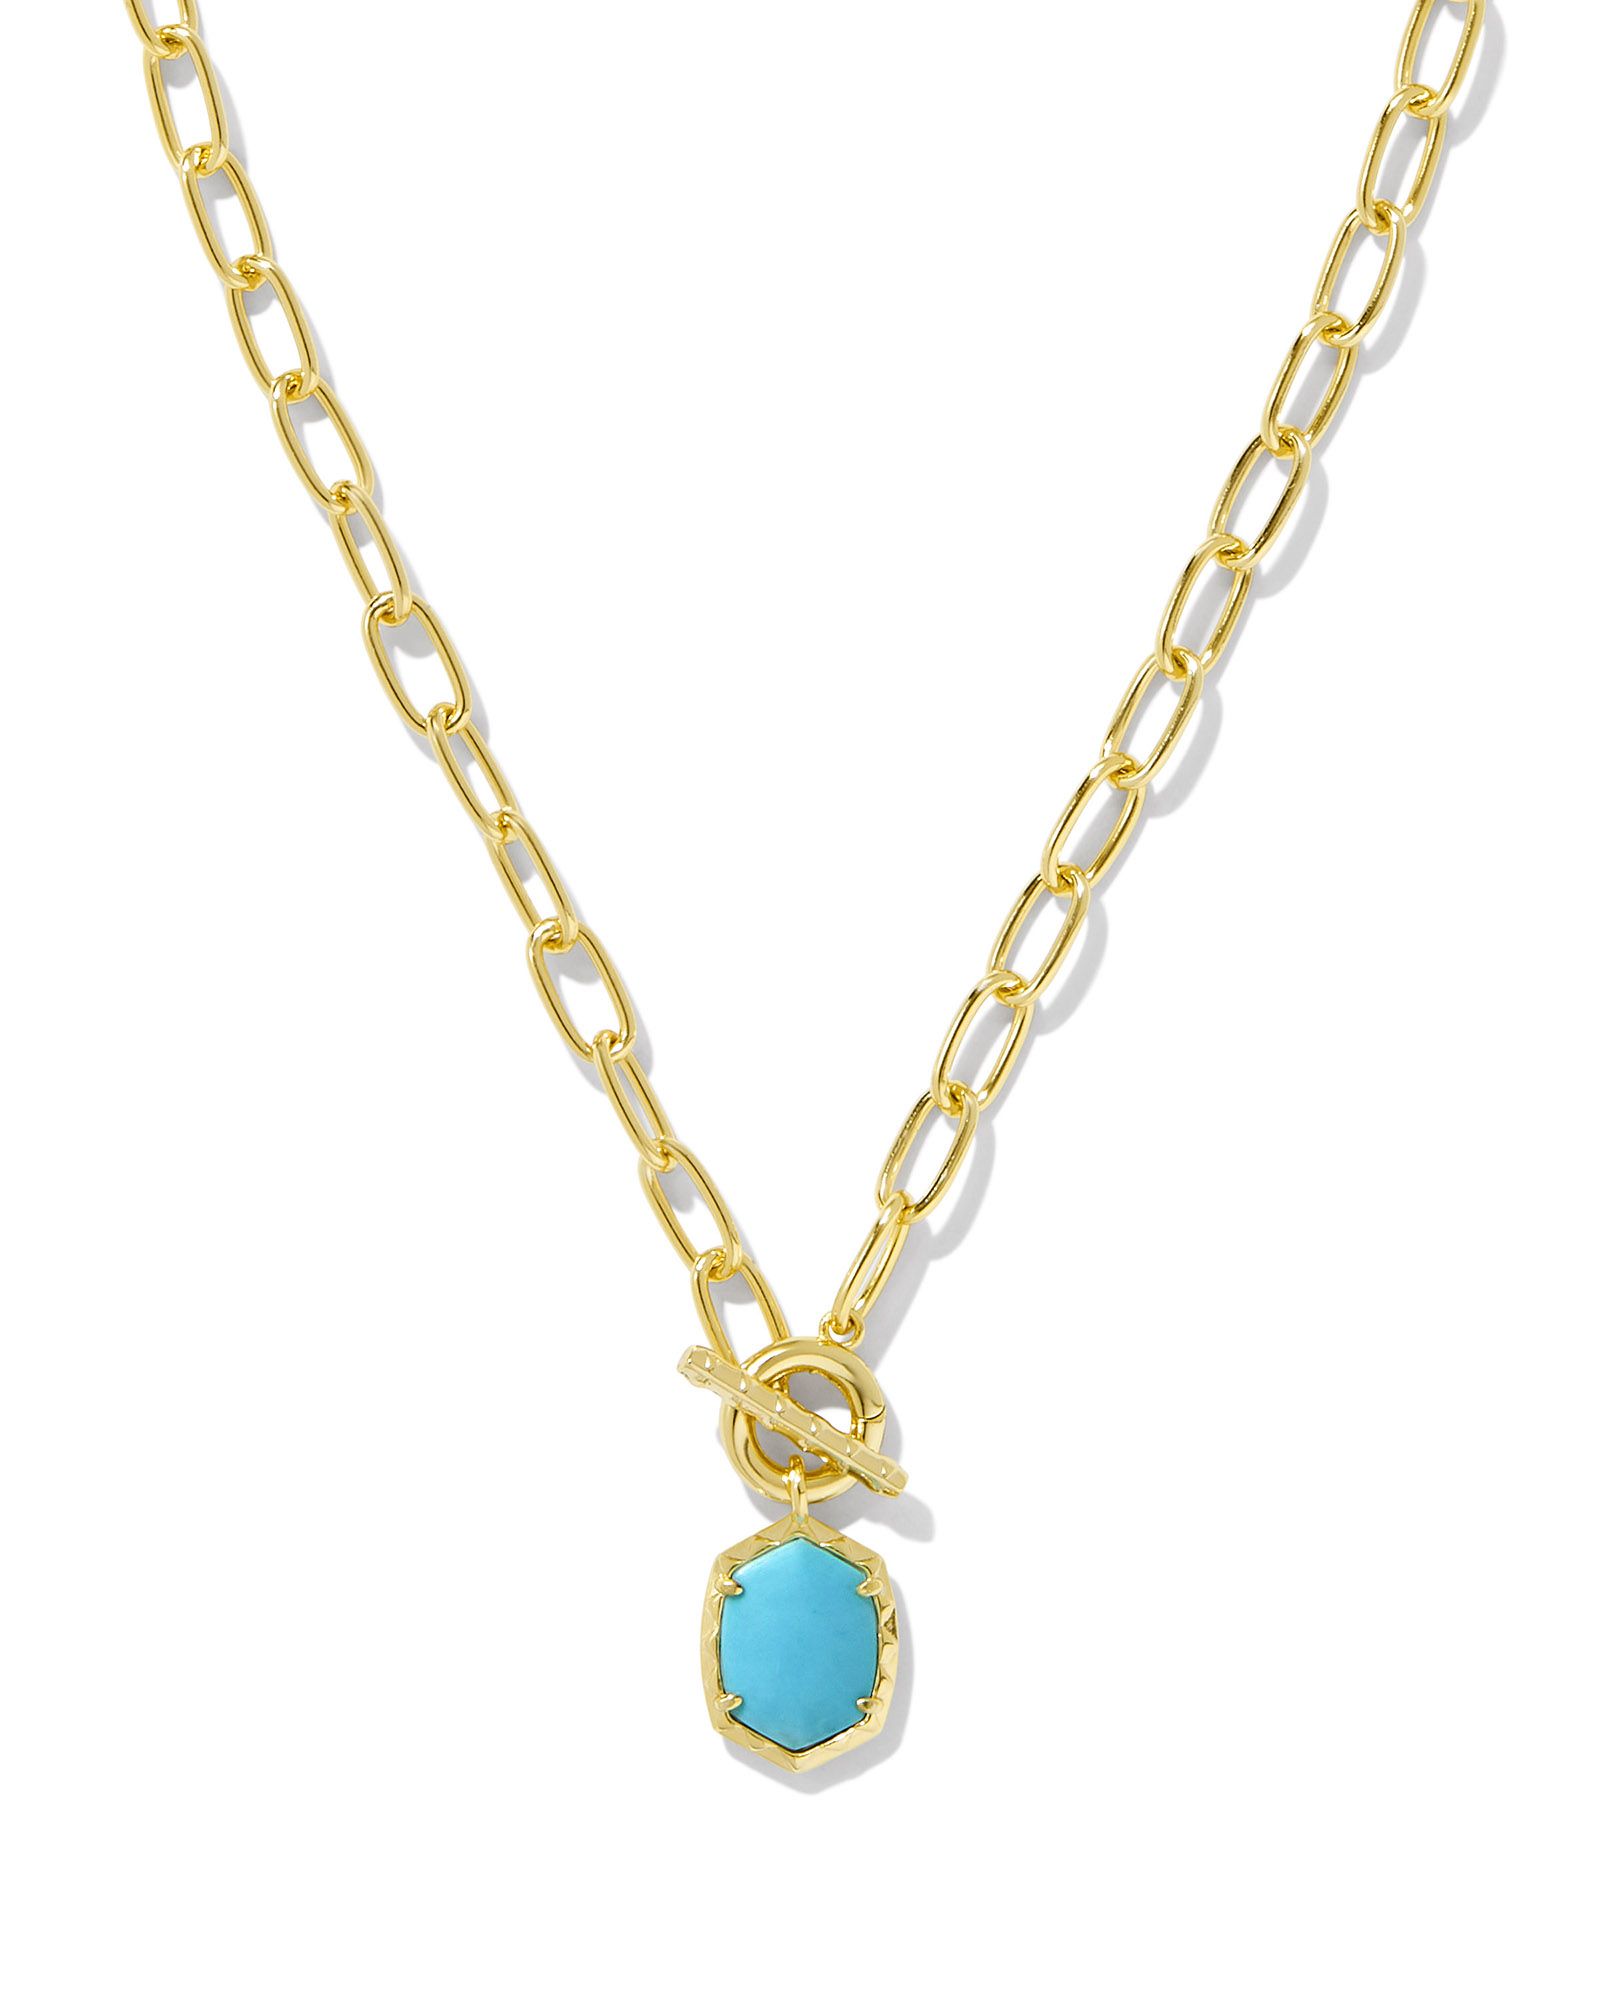 Daphne Convertible Gold Link and Chain Necklace in Variegated Turquoise Magnesite | Kendra Scott